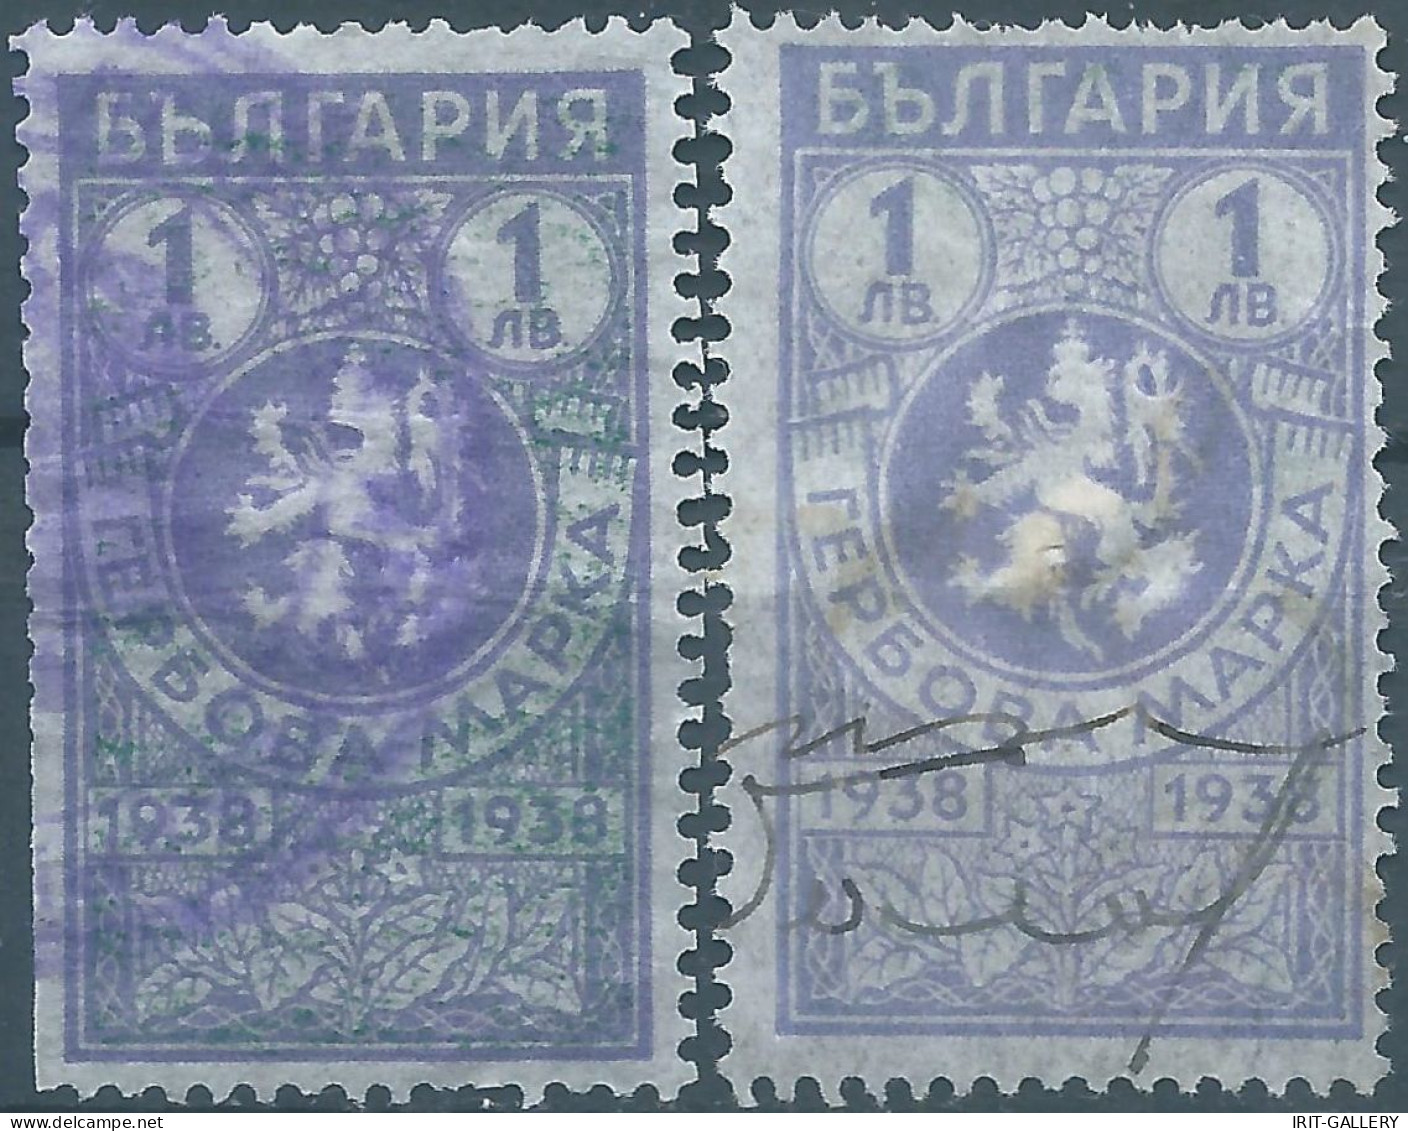 Bulgaria - Bulgarien - Bulgare,1938 Revenue Stamps Tax Fiscal,Used - Official Stamps